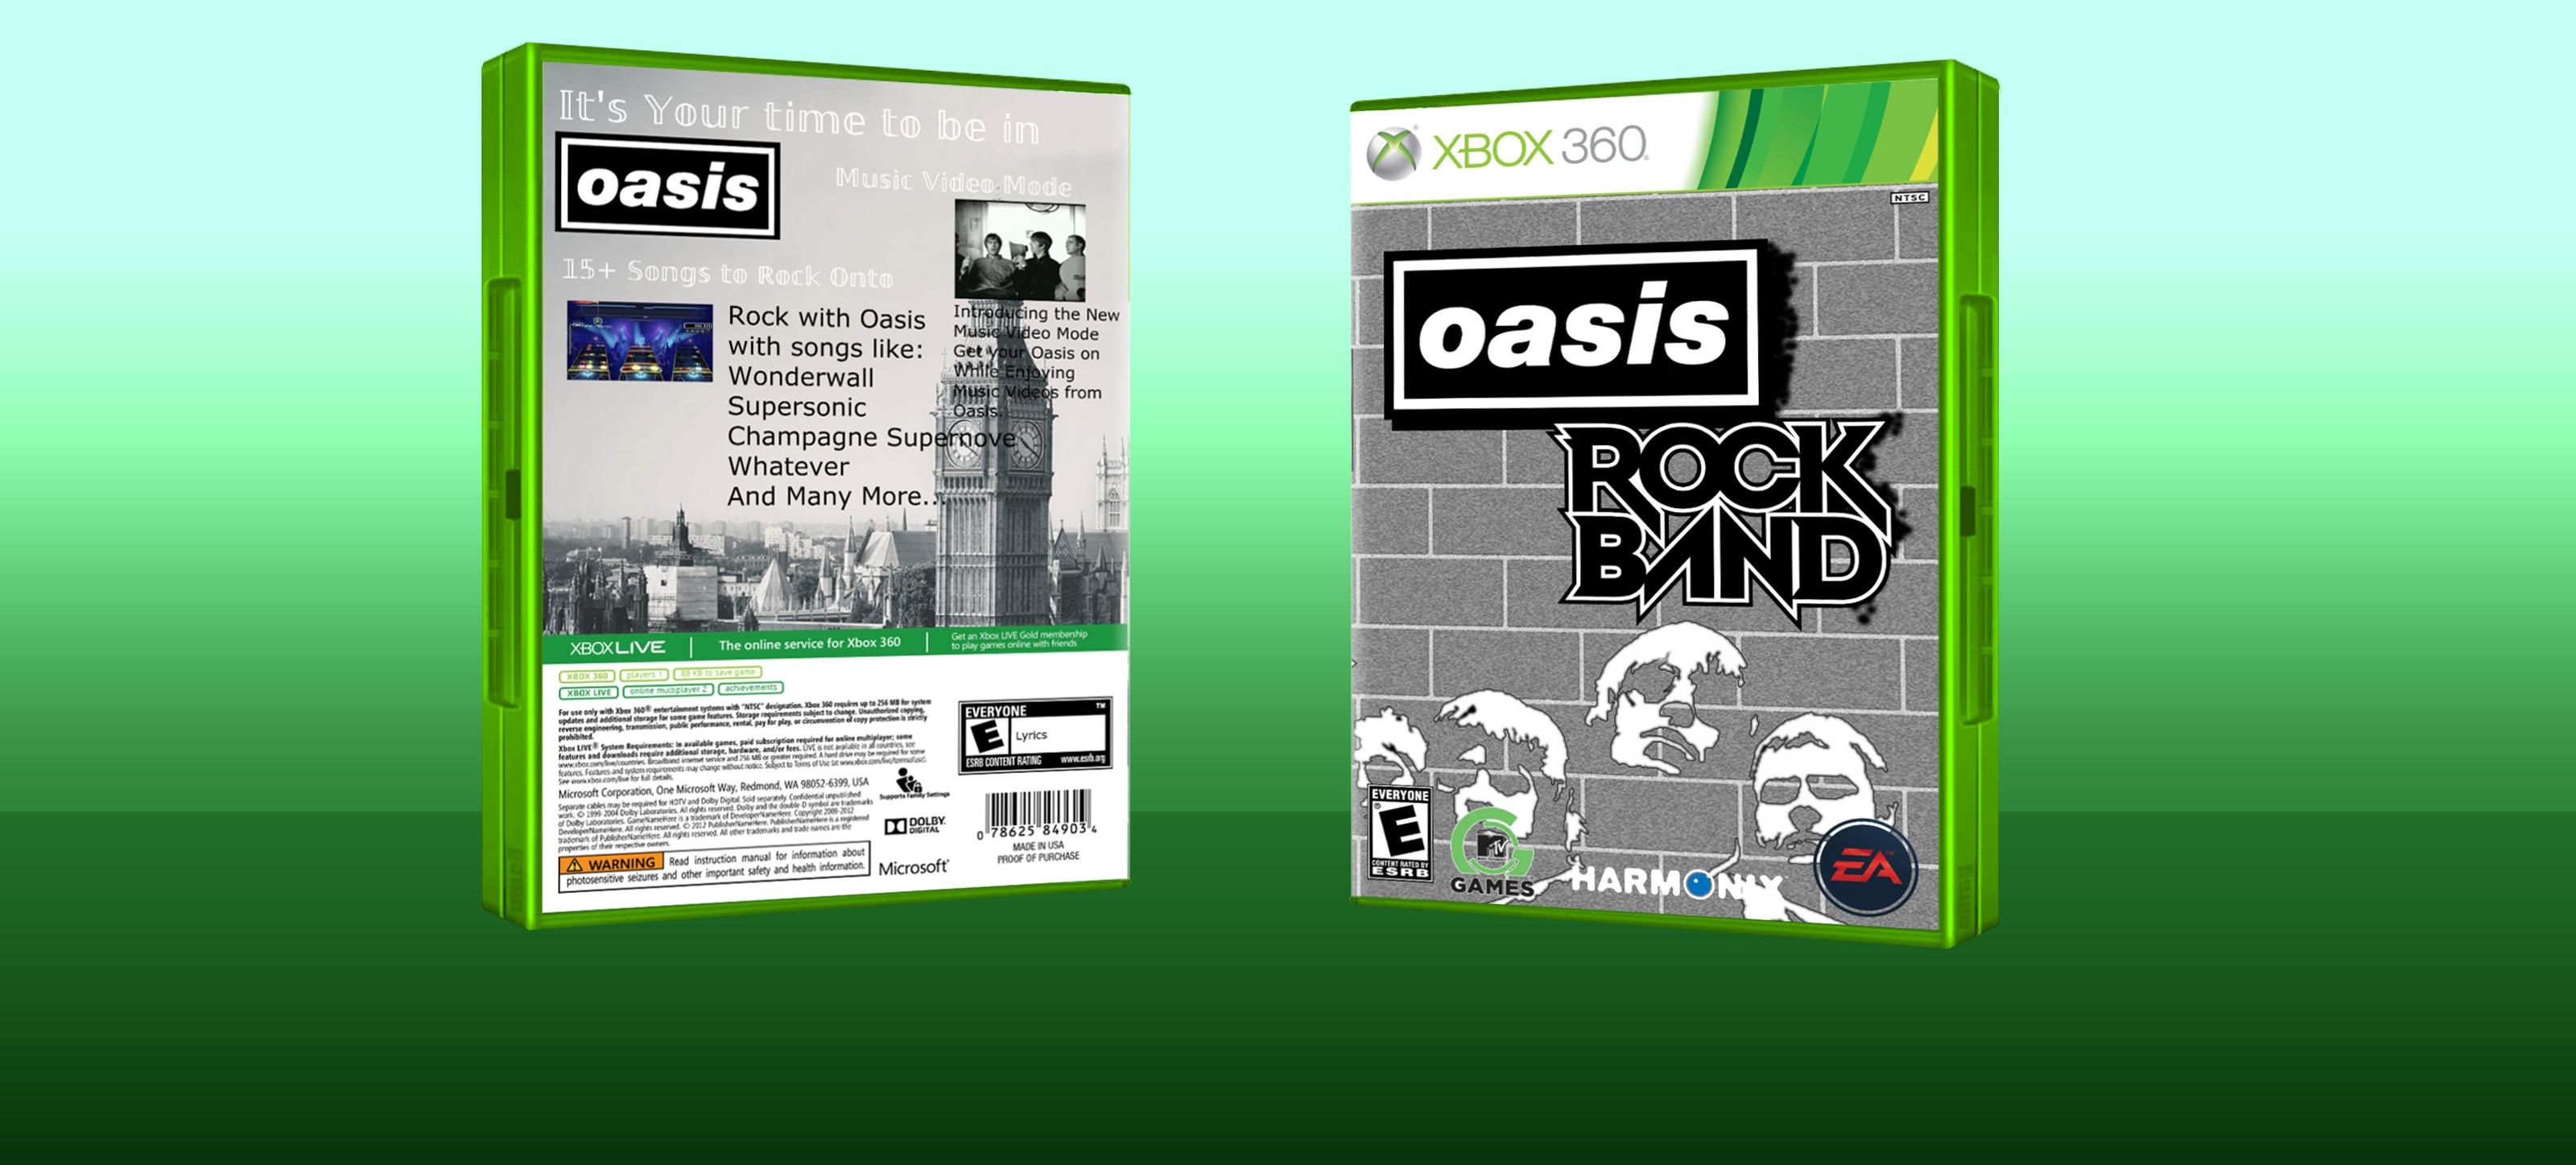 Oasis: Rock Band box cover